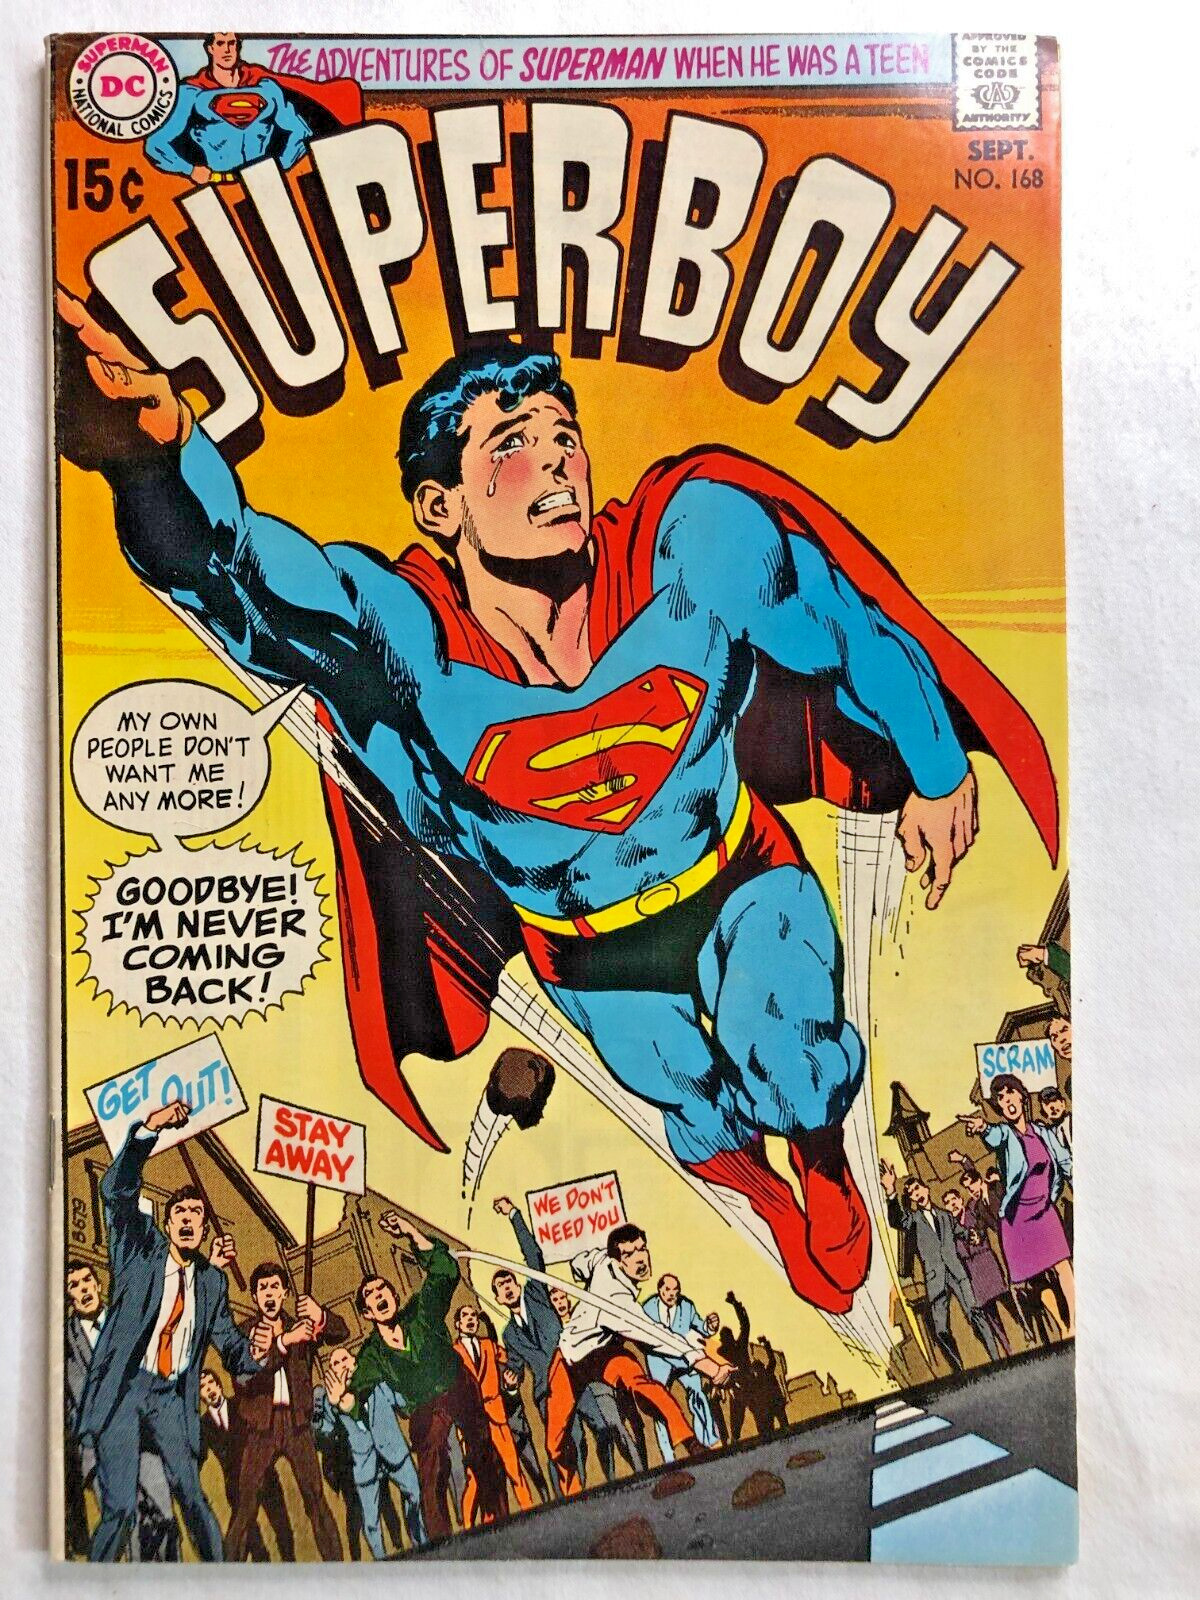 SUPERBOY #168 September 1970 Vintage Silver Age DC Comics Very Nice Condition